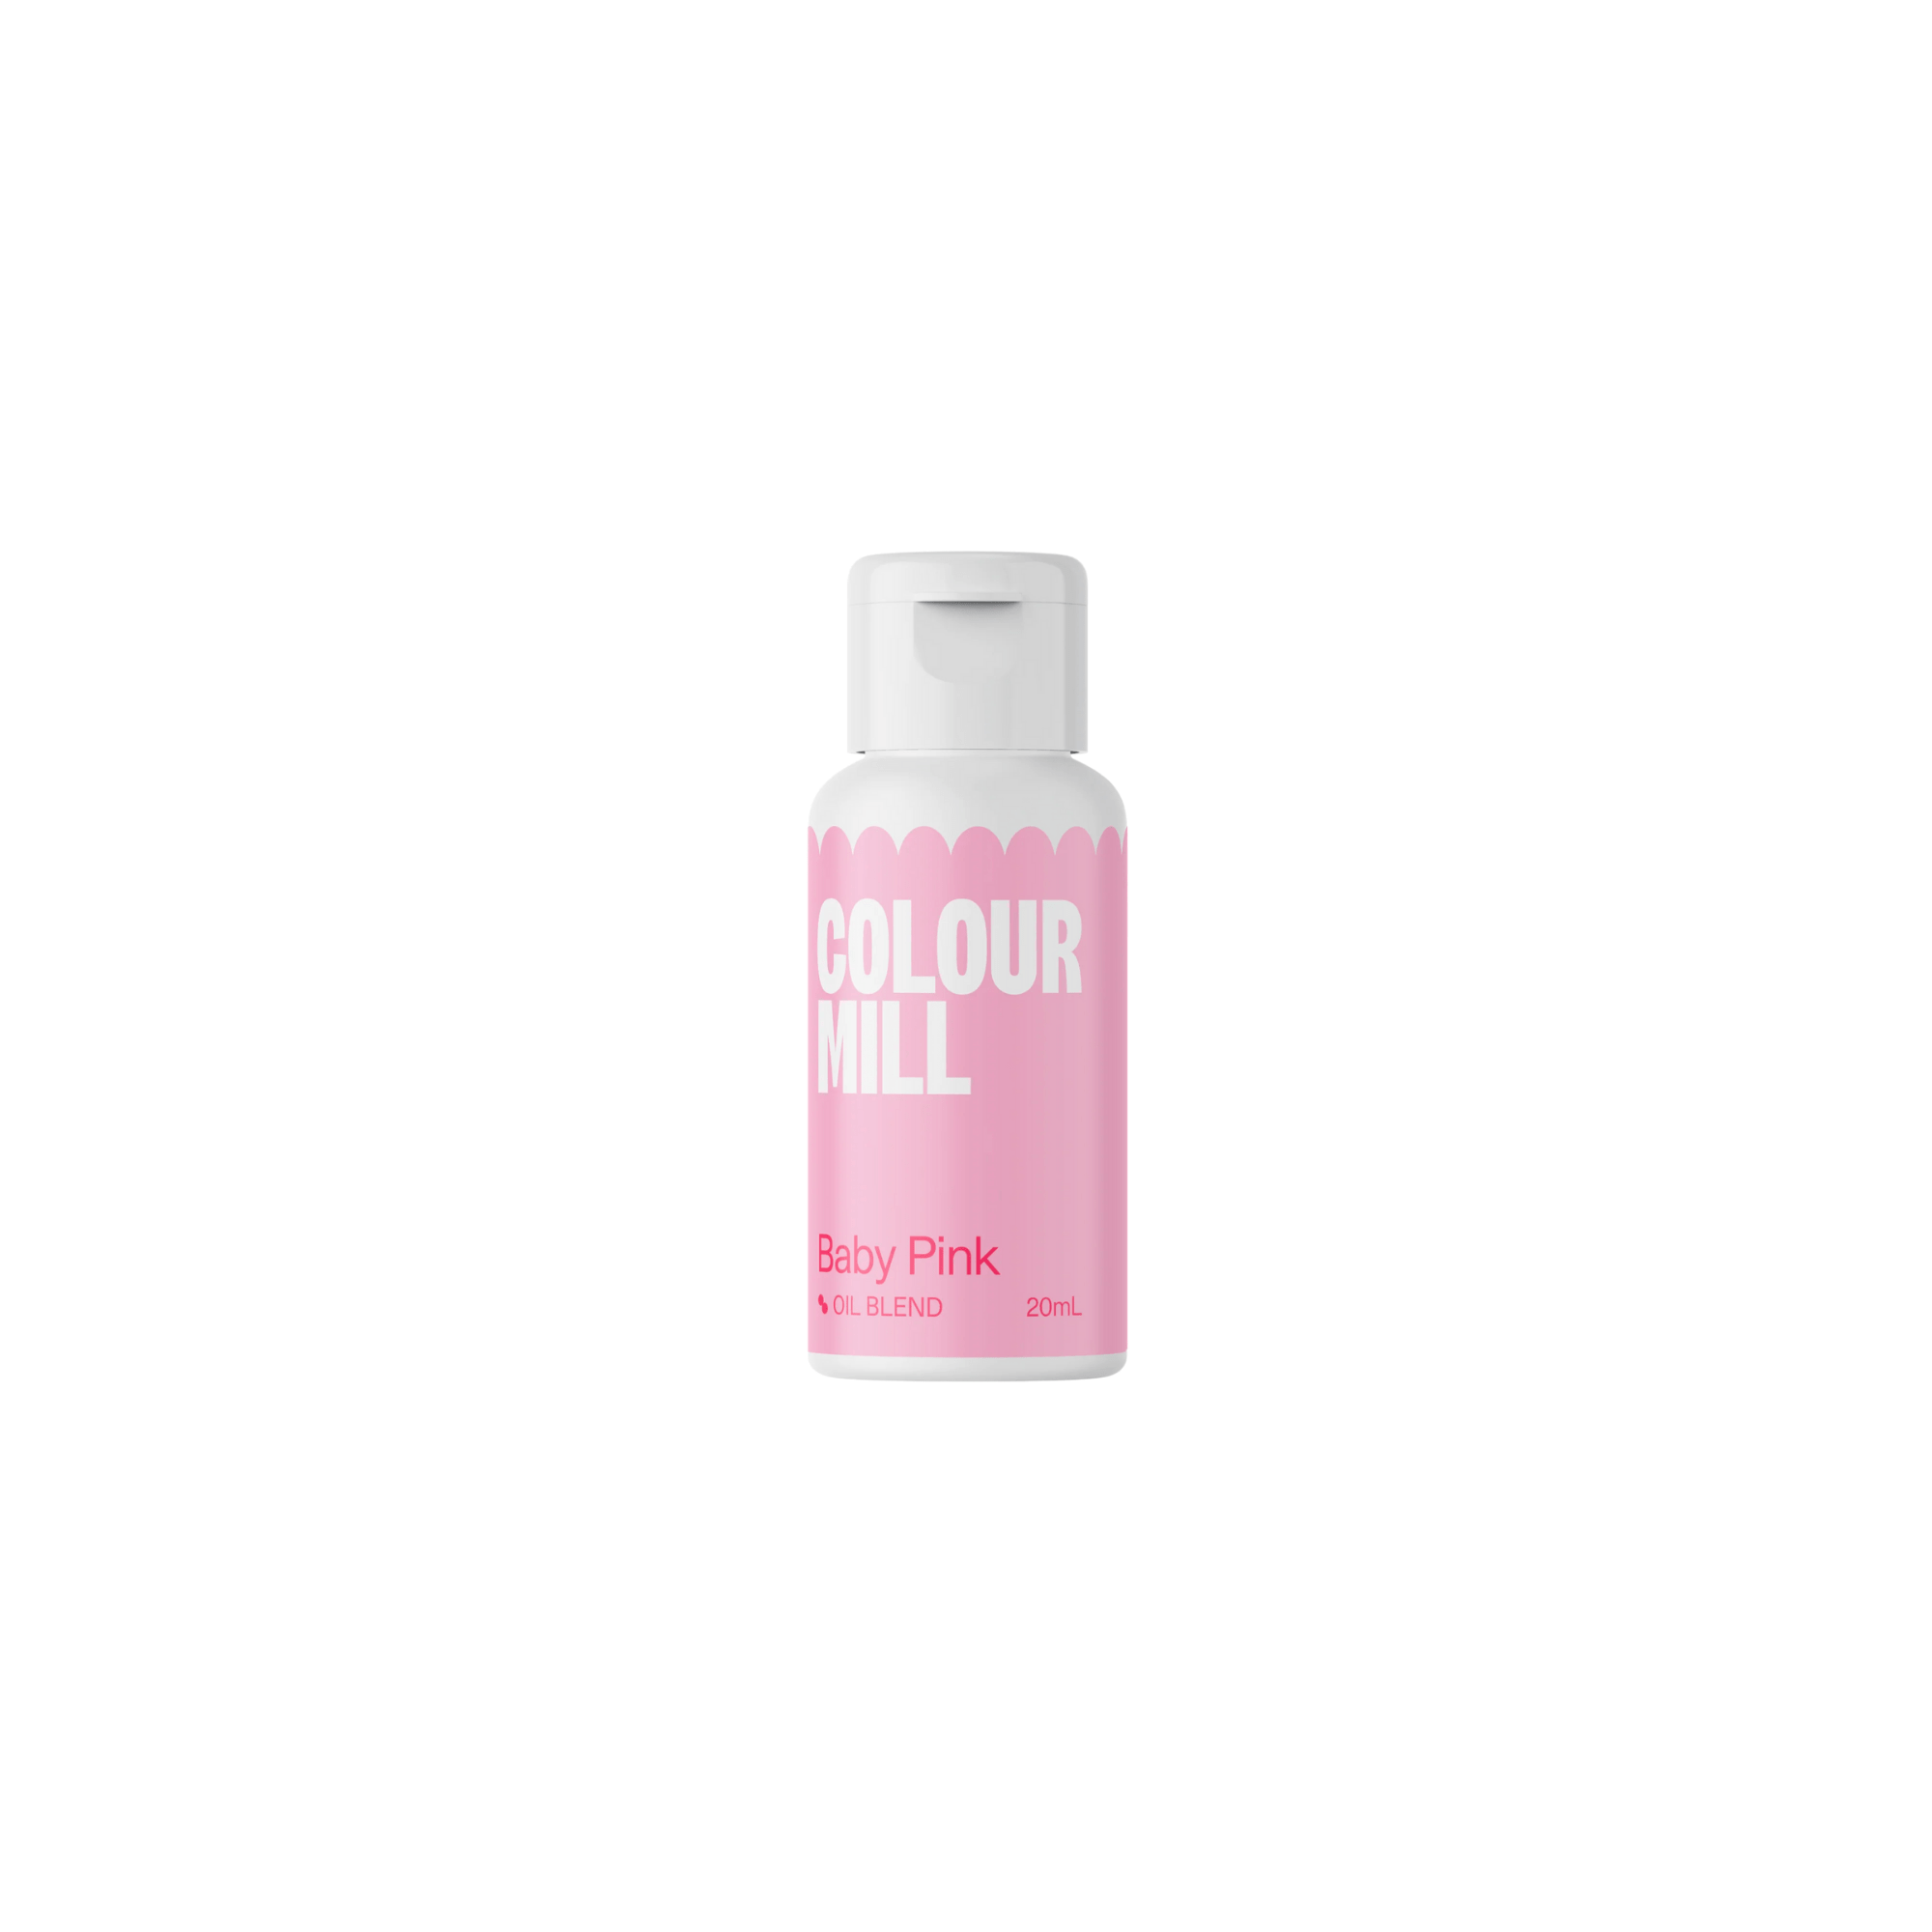 Happy Sprinkles 20ml Colour Mill Baby Pink - Oil Blend